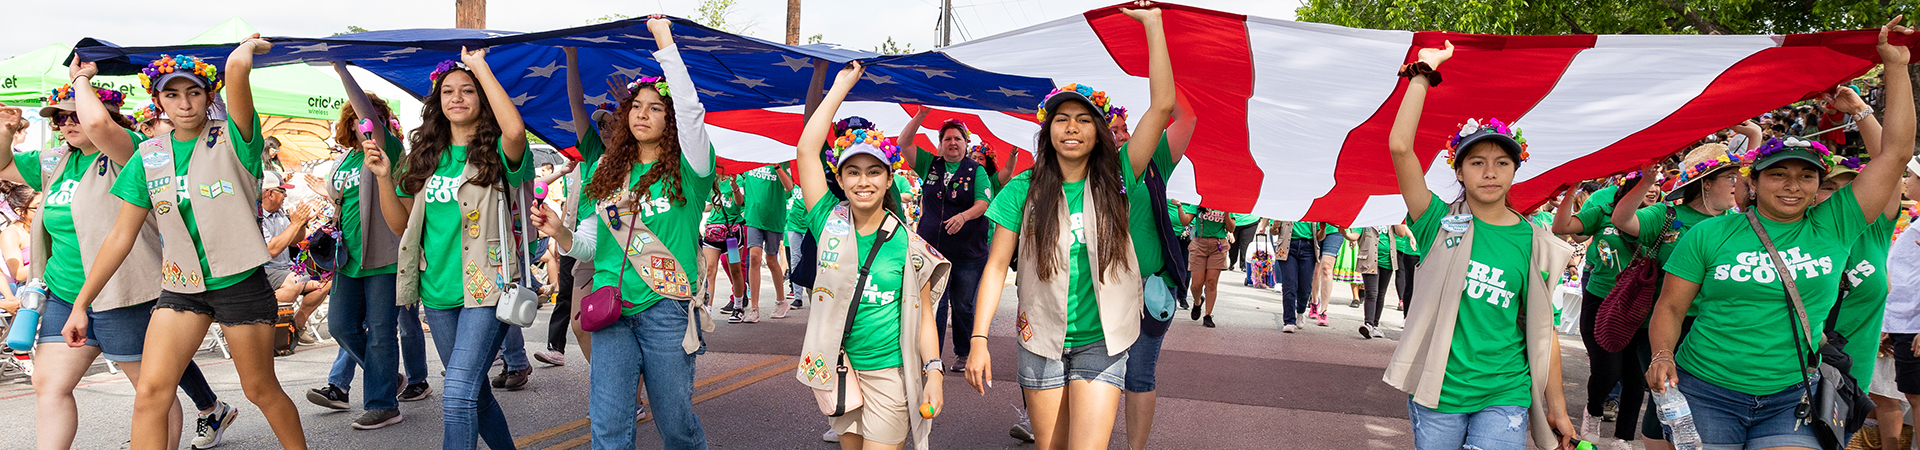  girl scouts carrying american flag in parade 